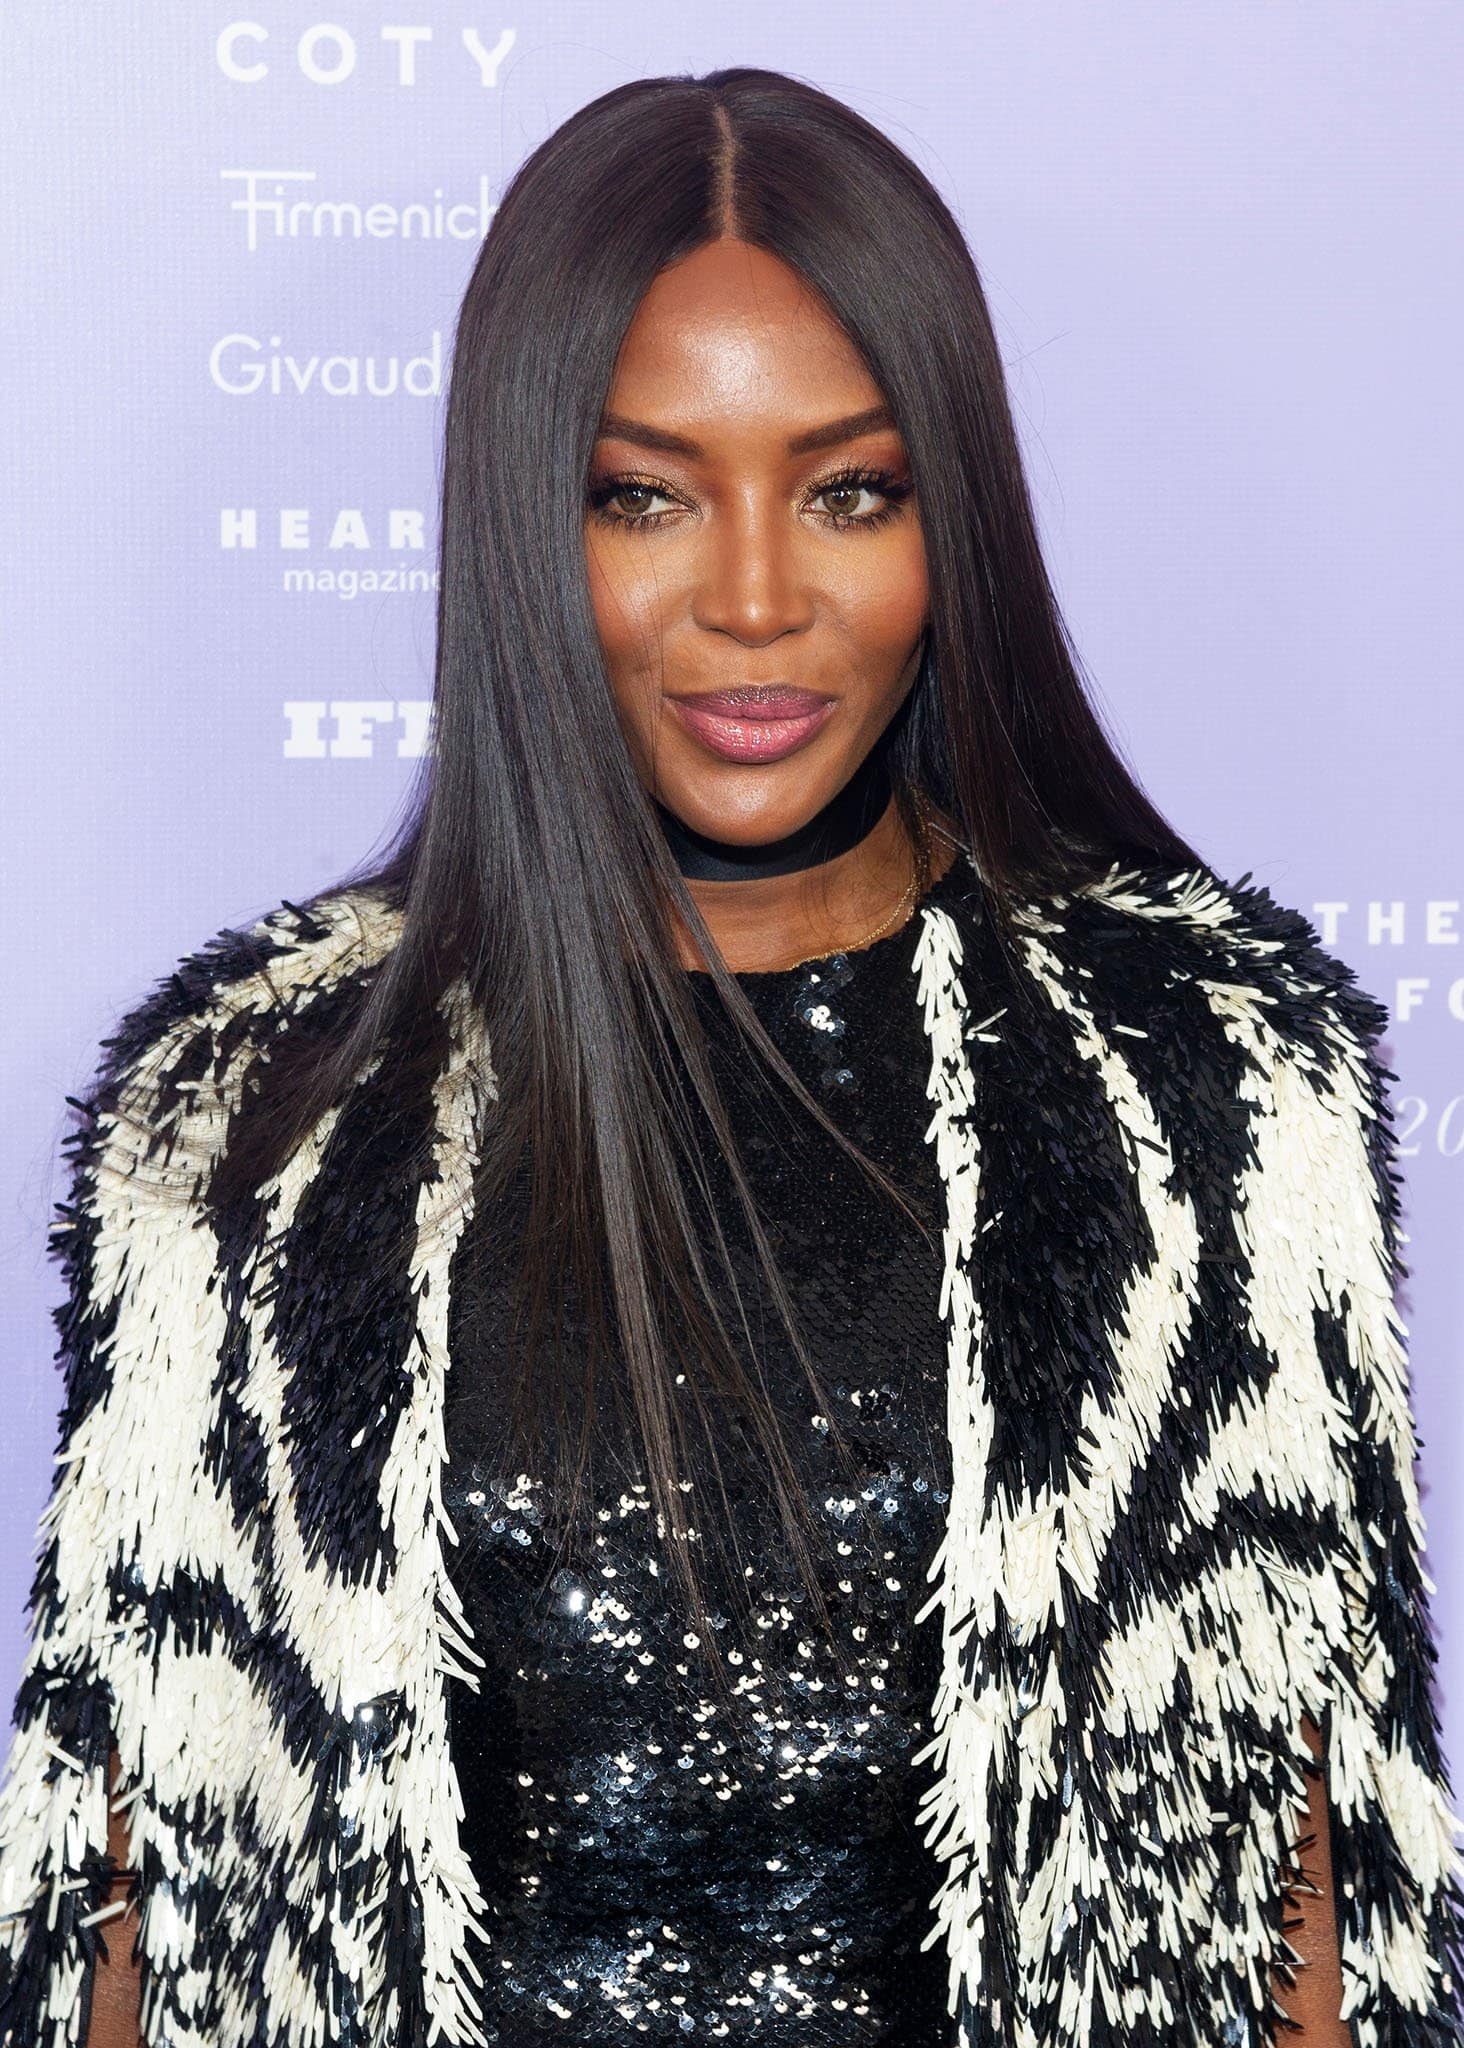 Thanks to her modeling career, acting gigs, and perfume line, Naomi Campbell remains one of the world's richest models ever